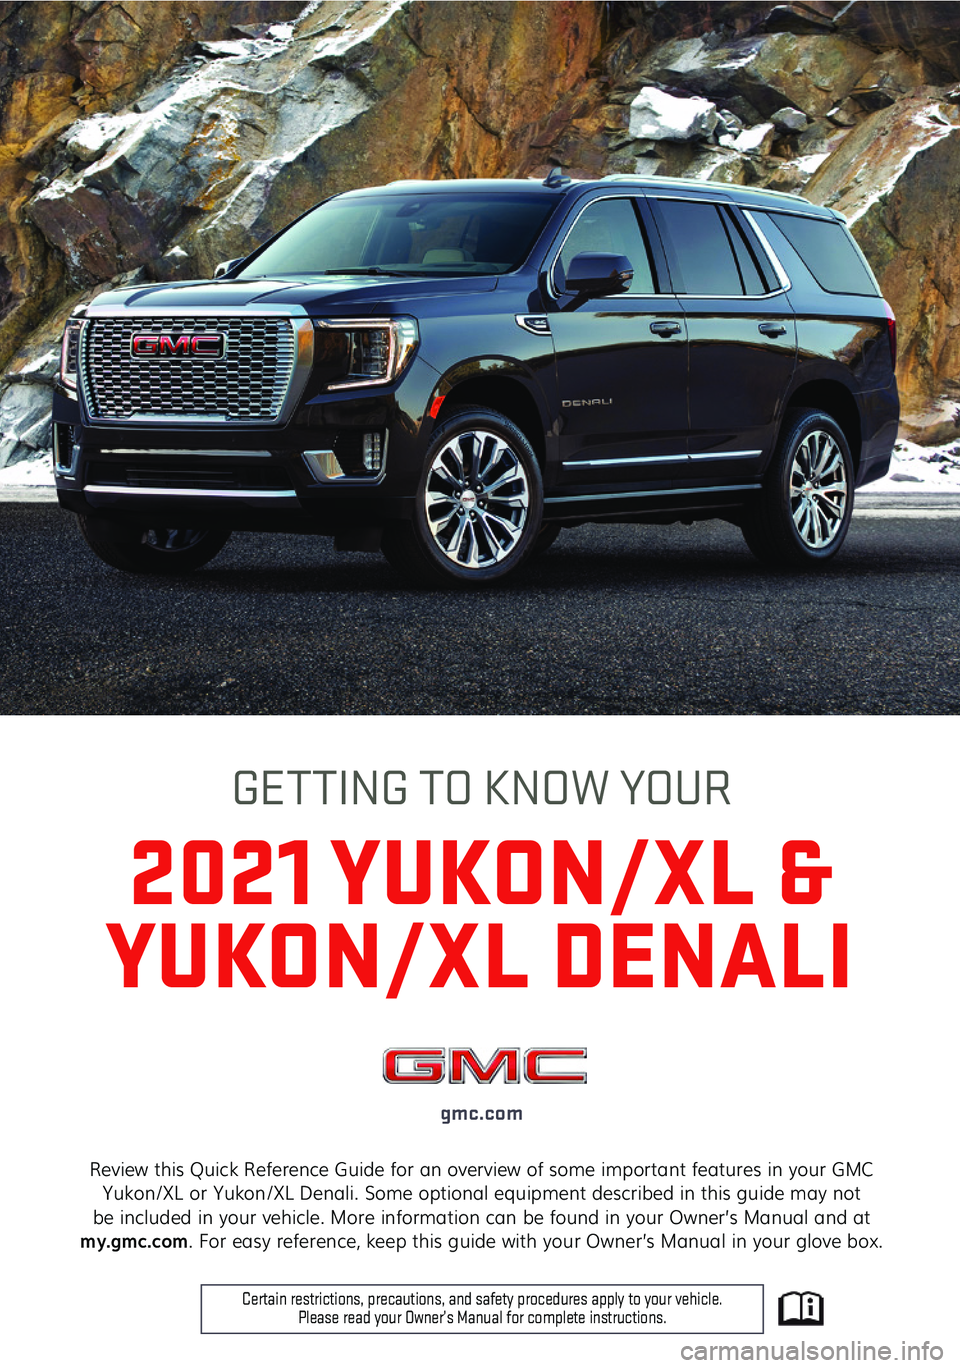 GMC YUKON 2021  Get To Know Guide 1
Review this Quick Reference Guide for an overview of some important features in your GMC Yukon/XL or Yukon/XL Denali. Some optional equipment described in this guide may not be included in your vehi